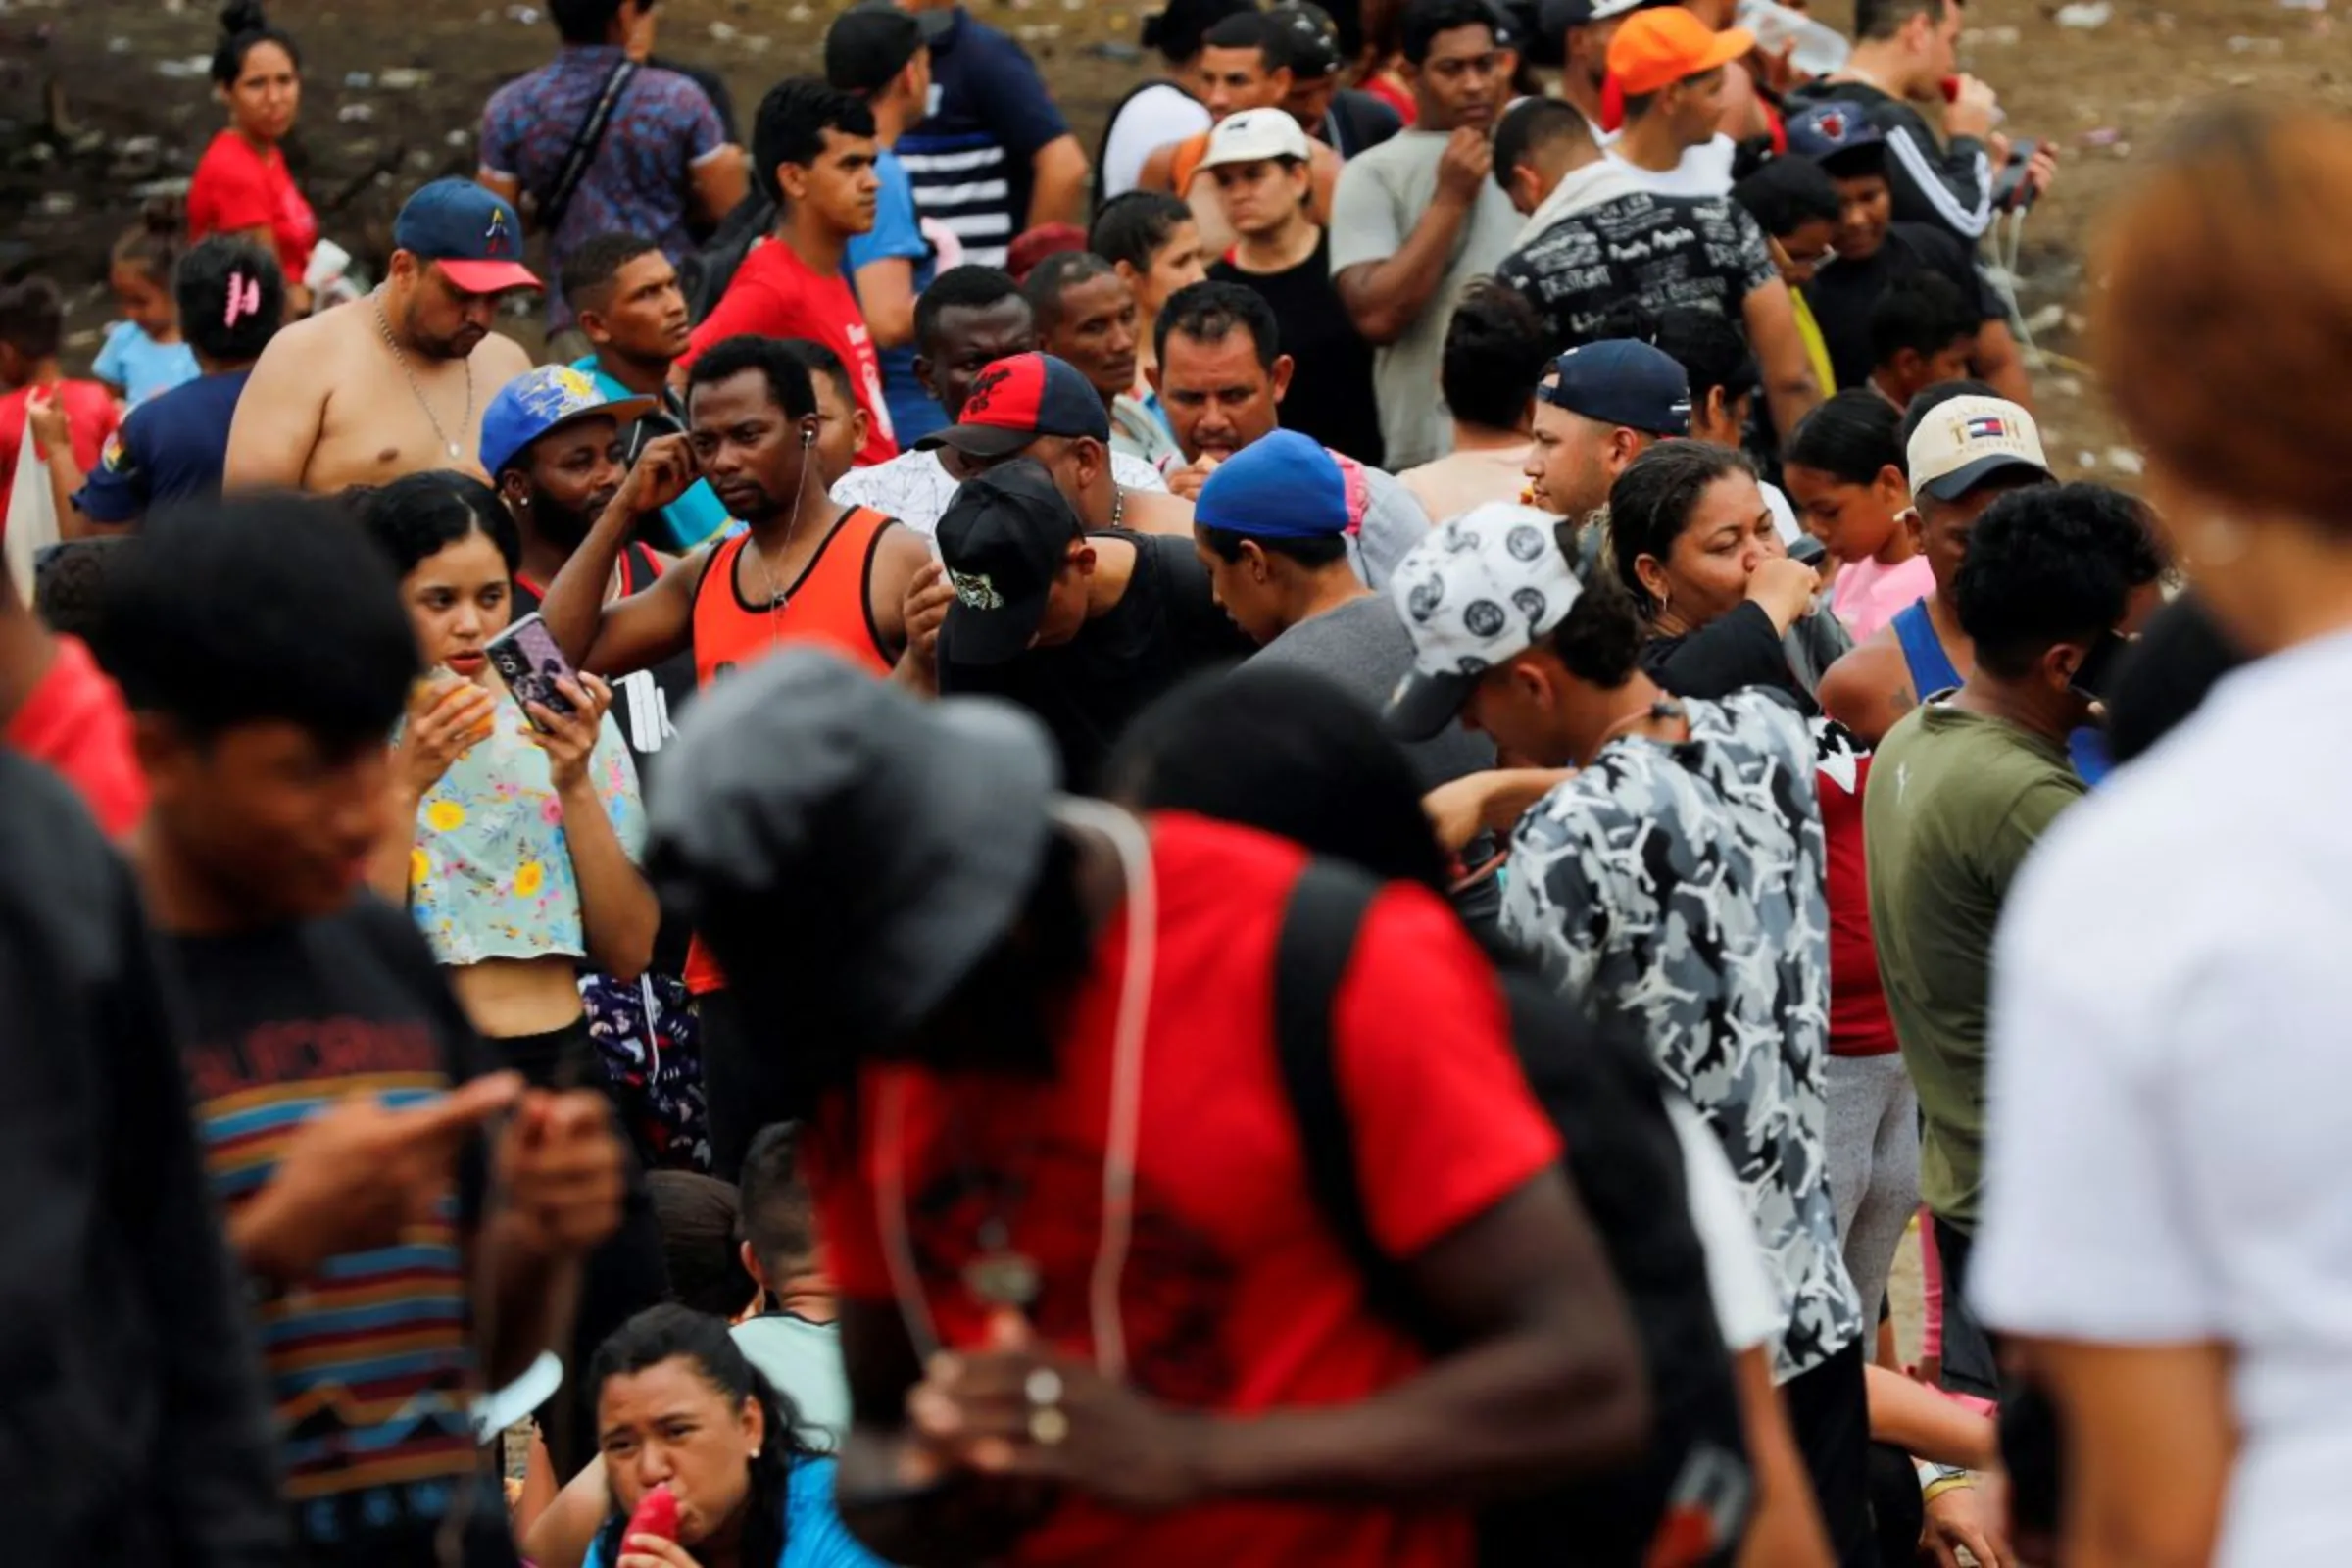 Migrants heading to the U.S. wait at the Migrants Reception Station in the Darien province, Panama, September 23, 2023. REUTERS/Aris Martinez